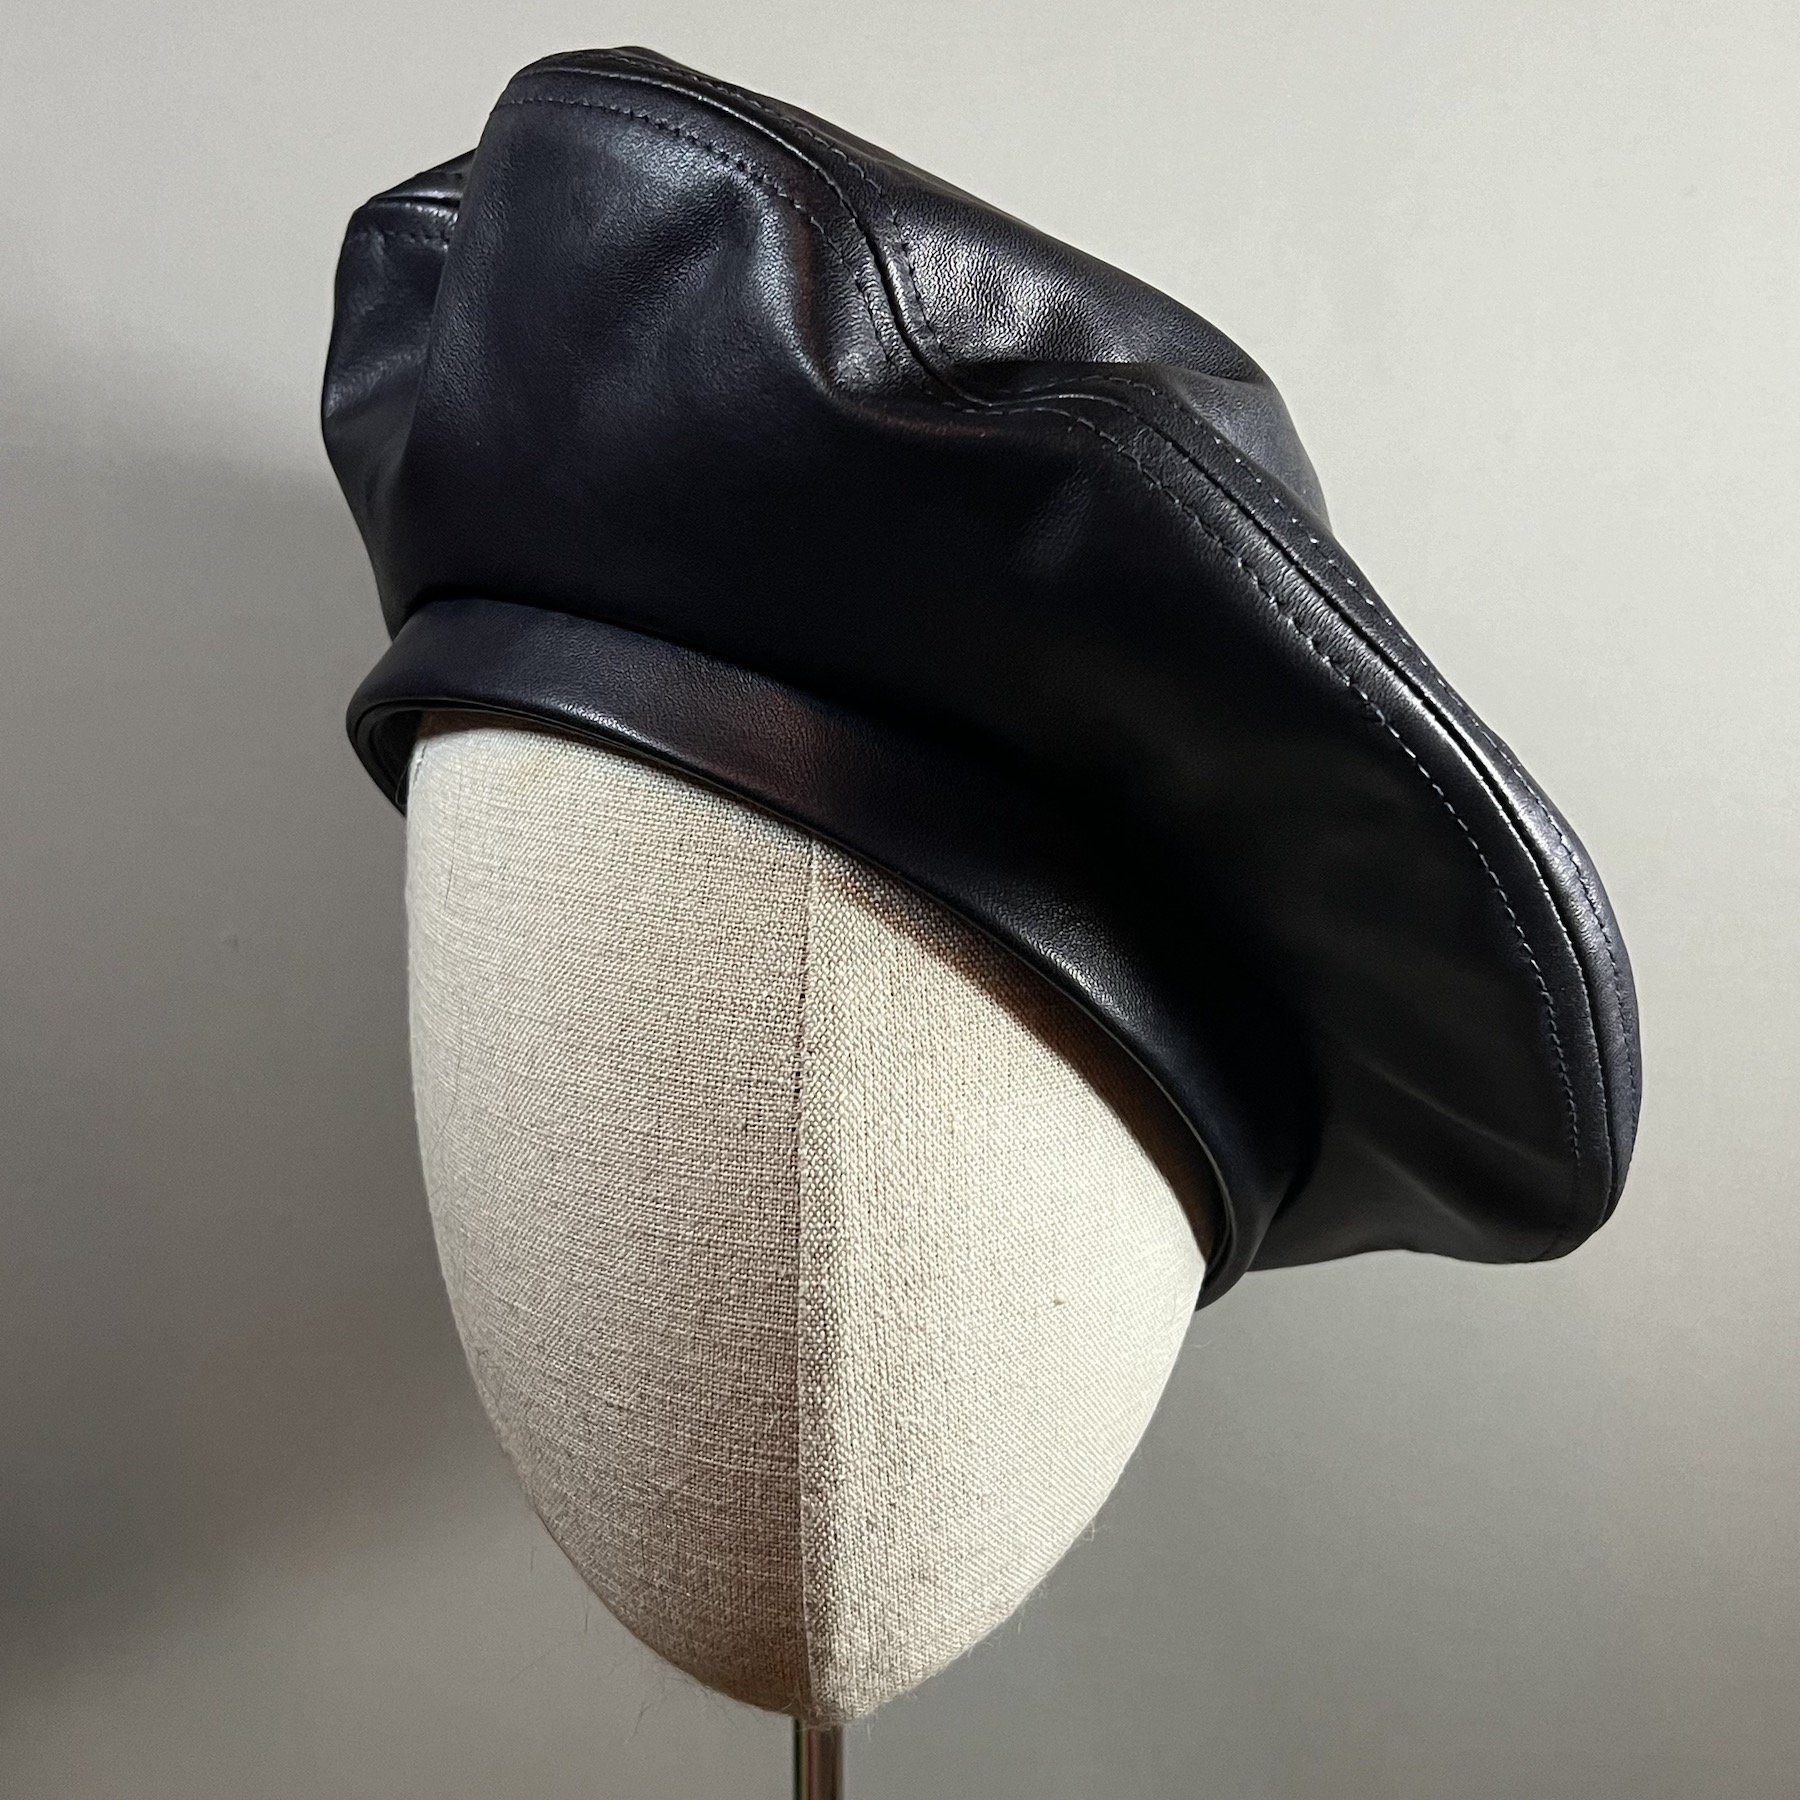 Sally Caswell Millinery Leather Beret.jpeg